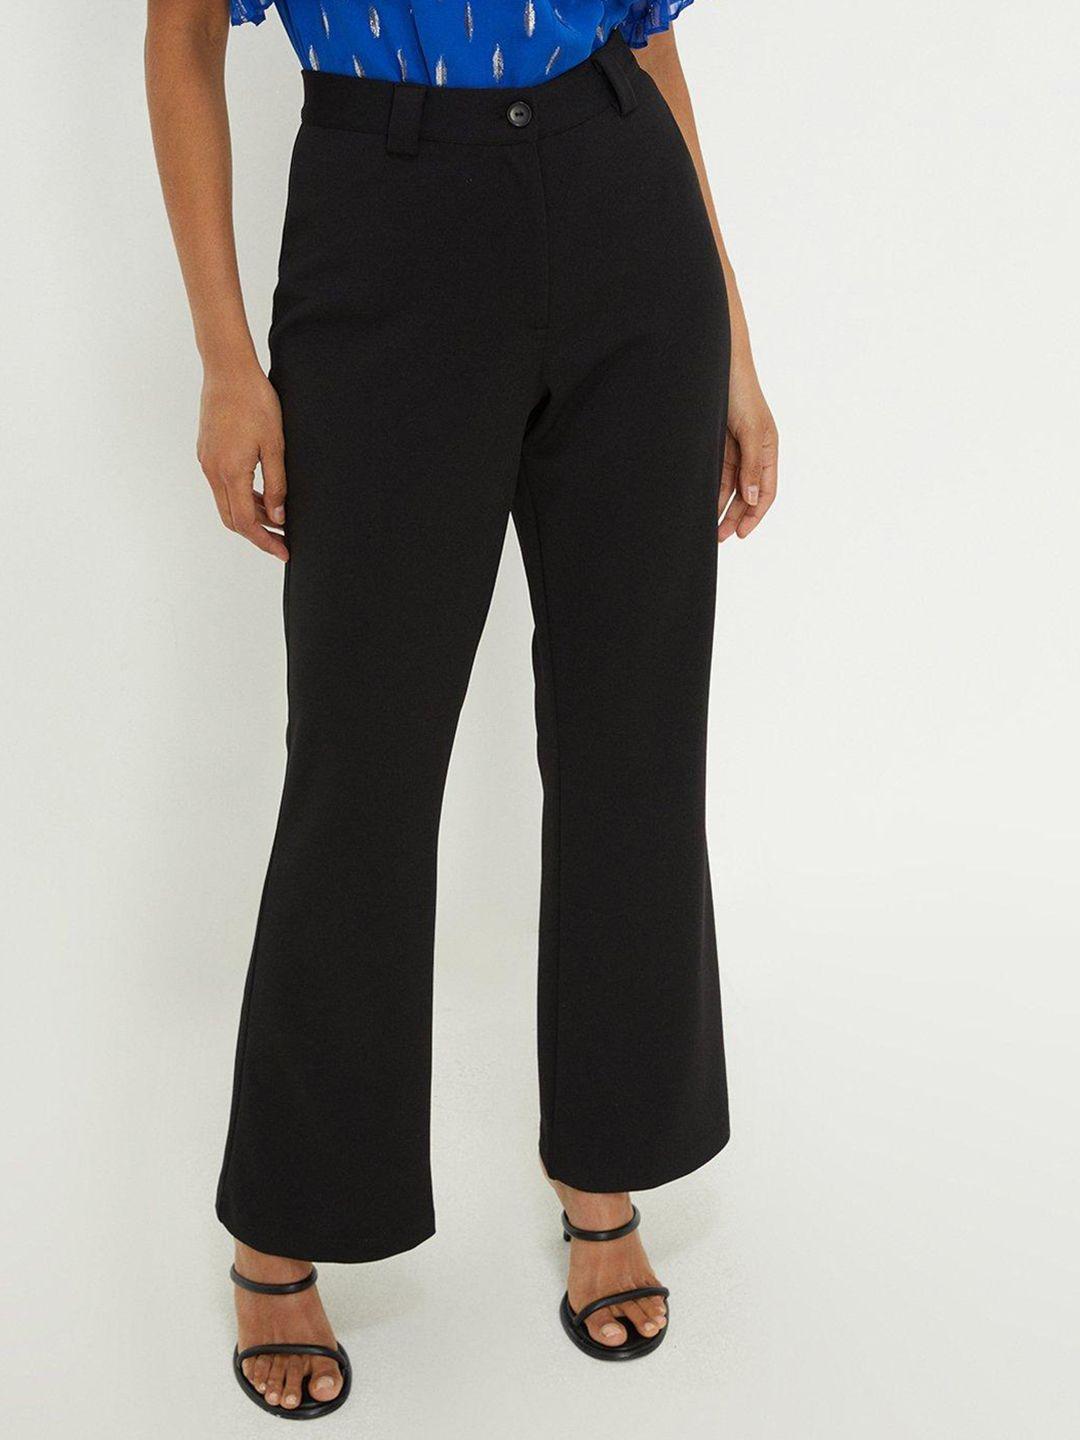 dorothy perkins women solid bootcut trousers